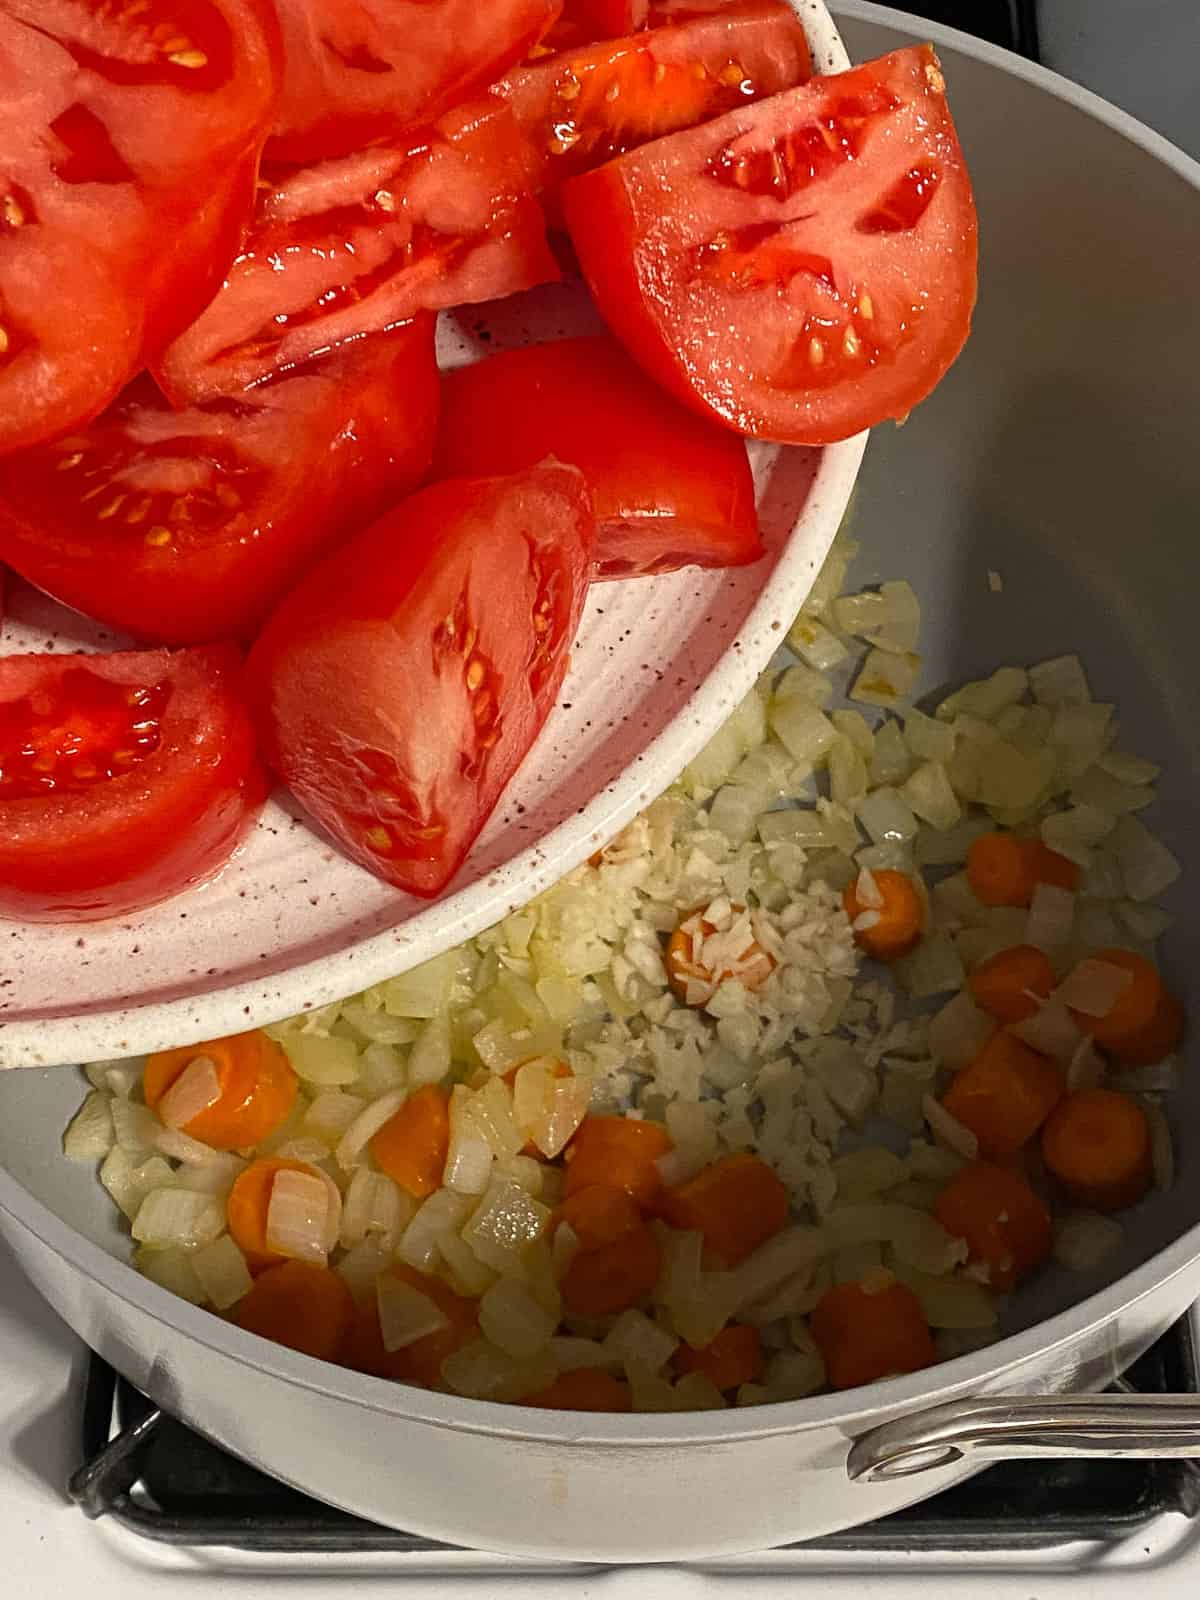 process of adding tomatoes to pan